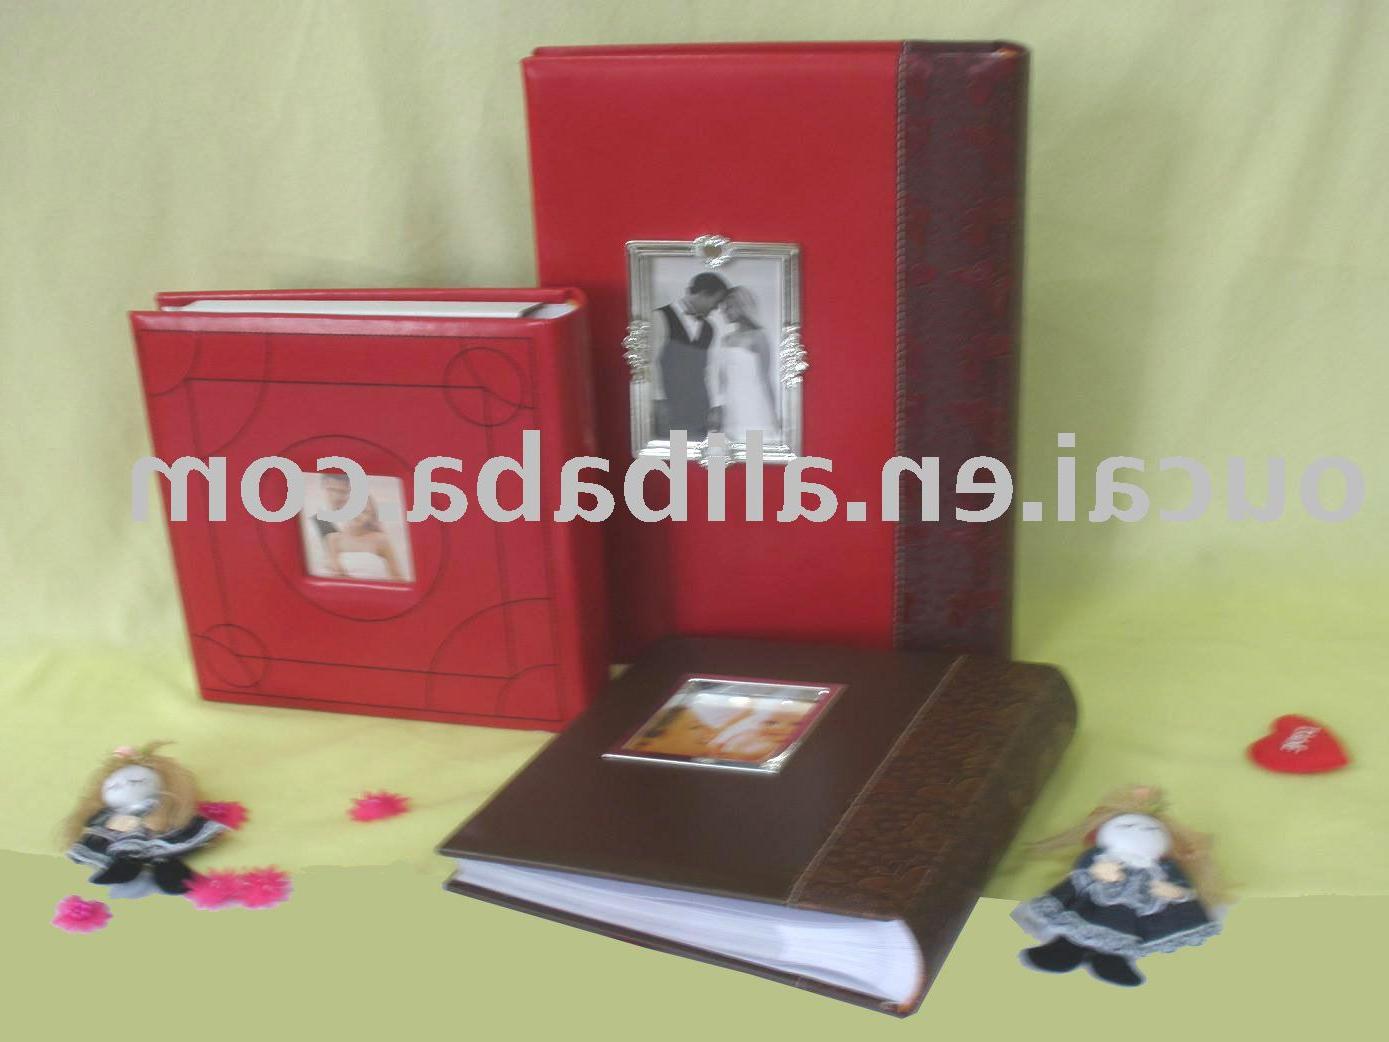 See larger image: WEDDING PHOTO ALBUM PU COVER PAPER INNER